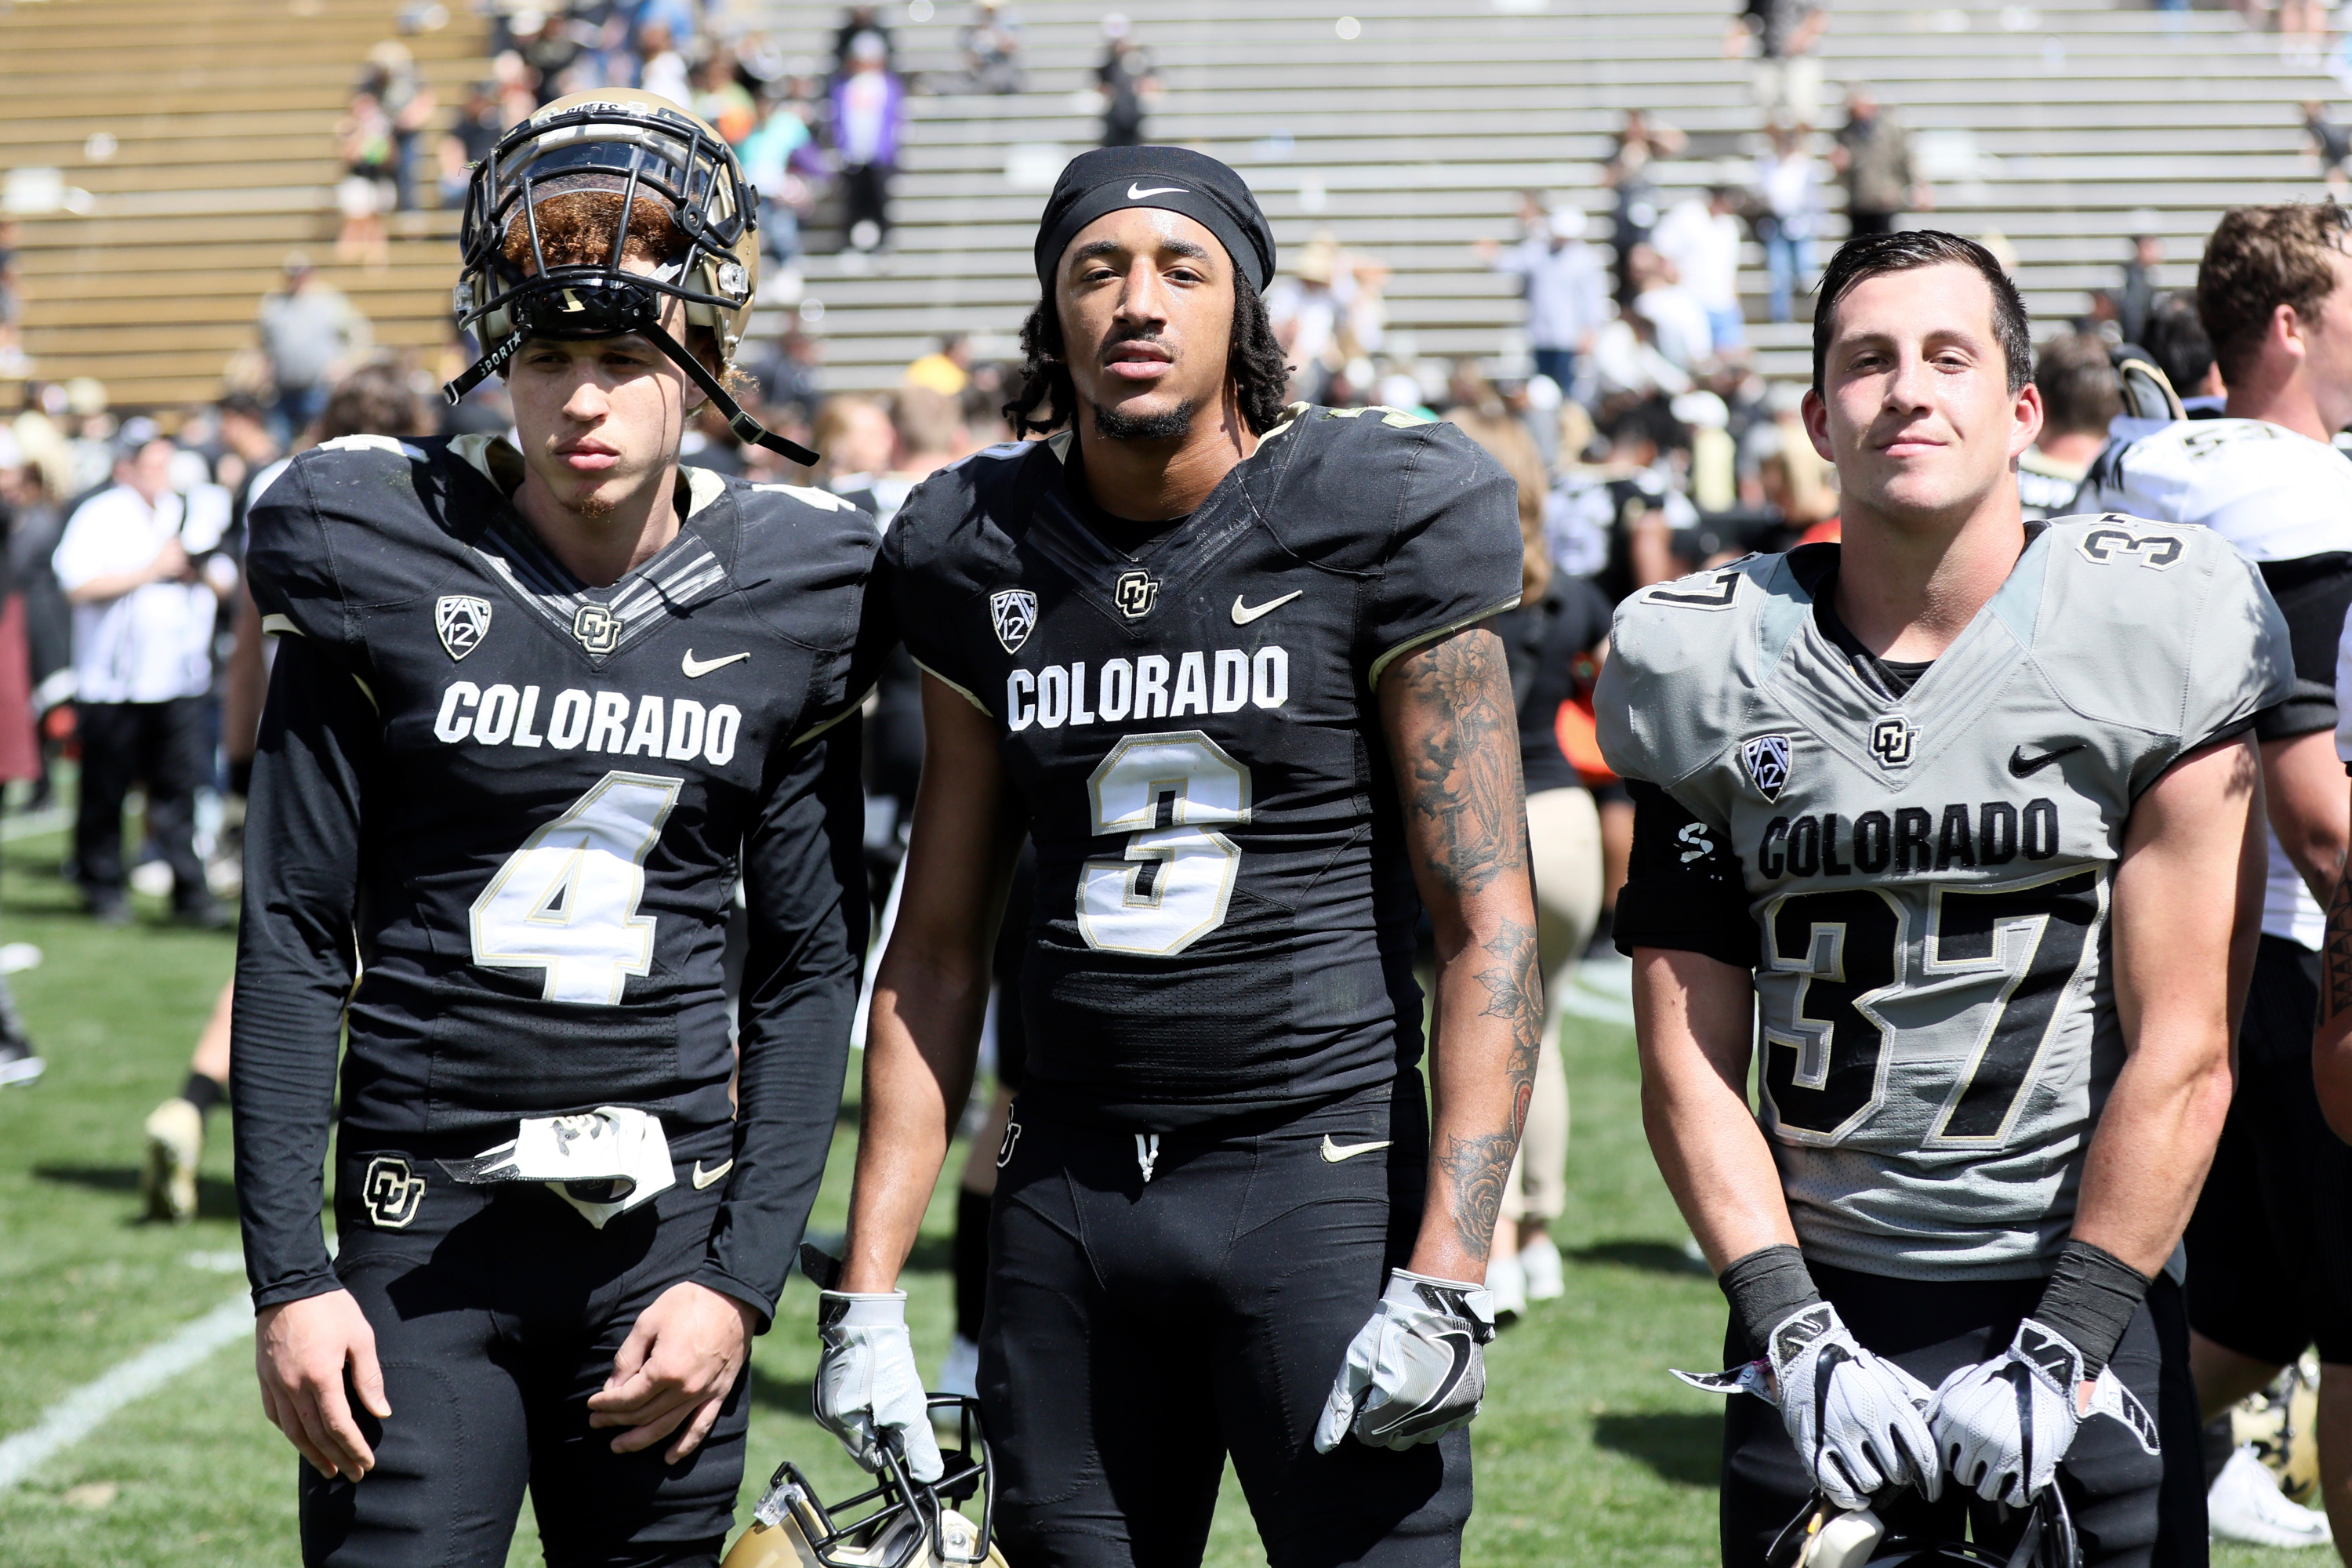 Team Gold prevails during CU’s annual Spring Game